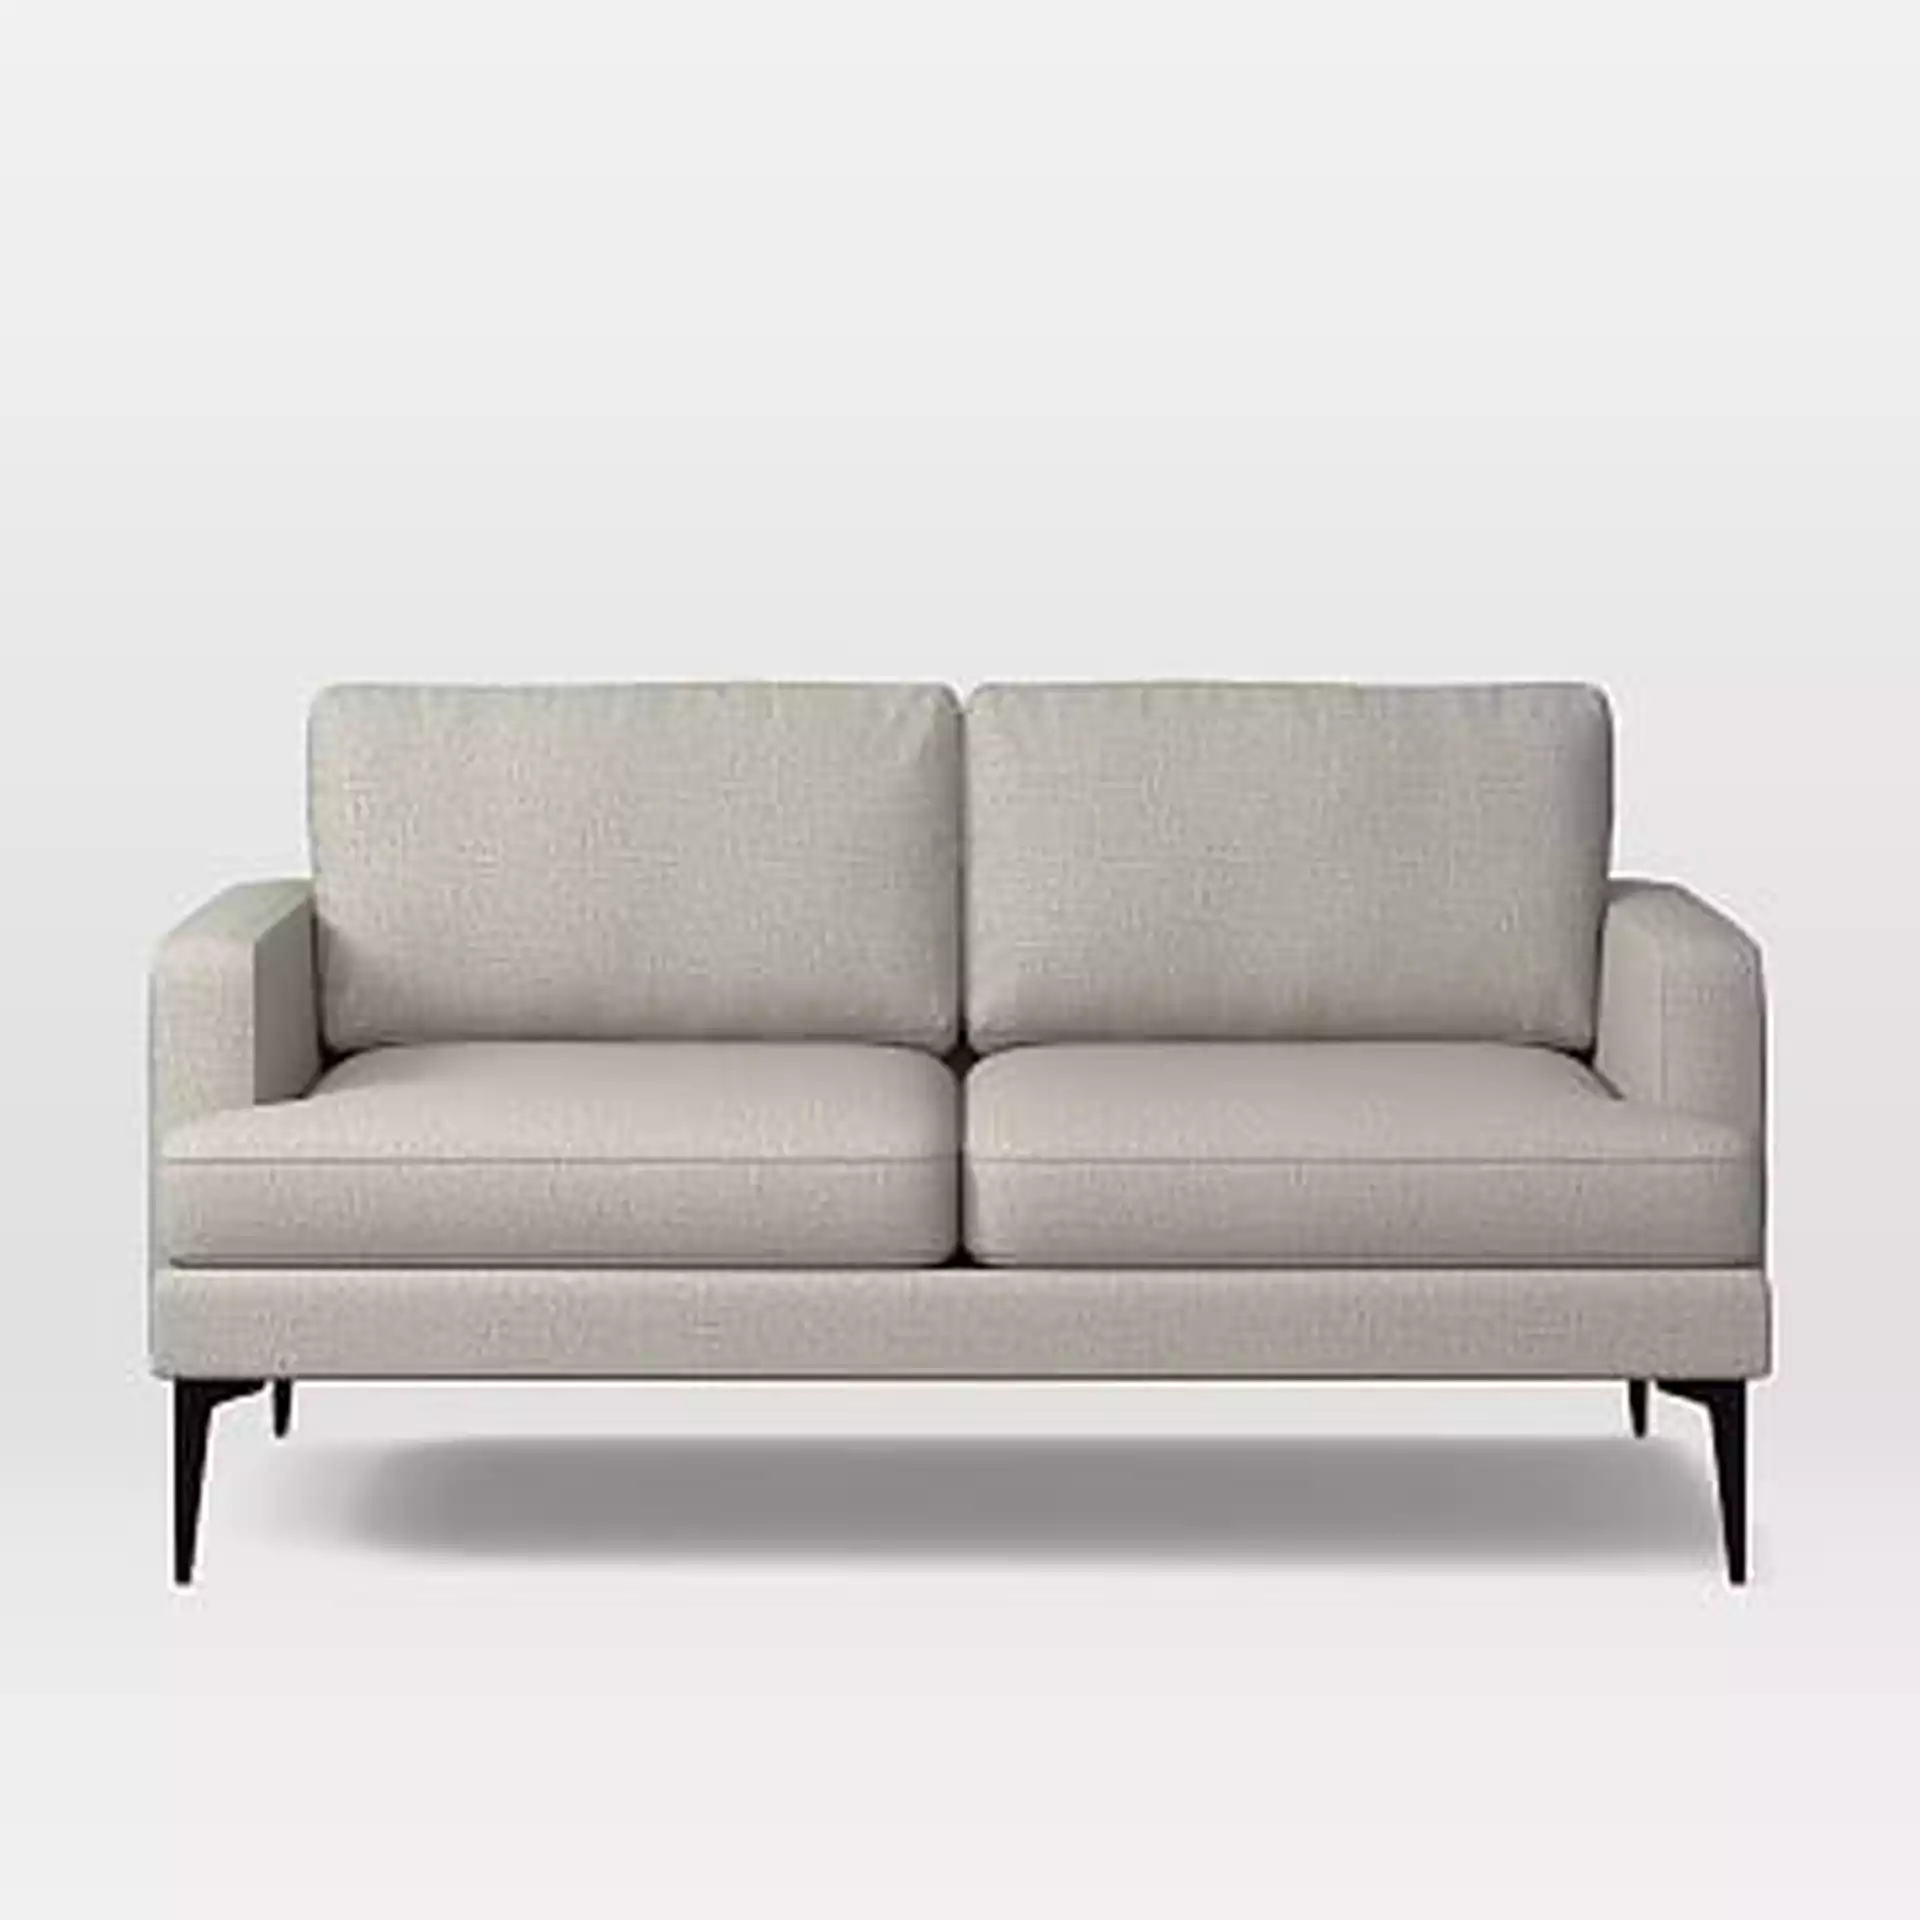 Andes Loveseat, Poly , Twill, Dove, Dark Pewter